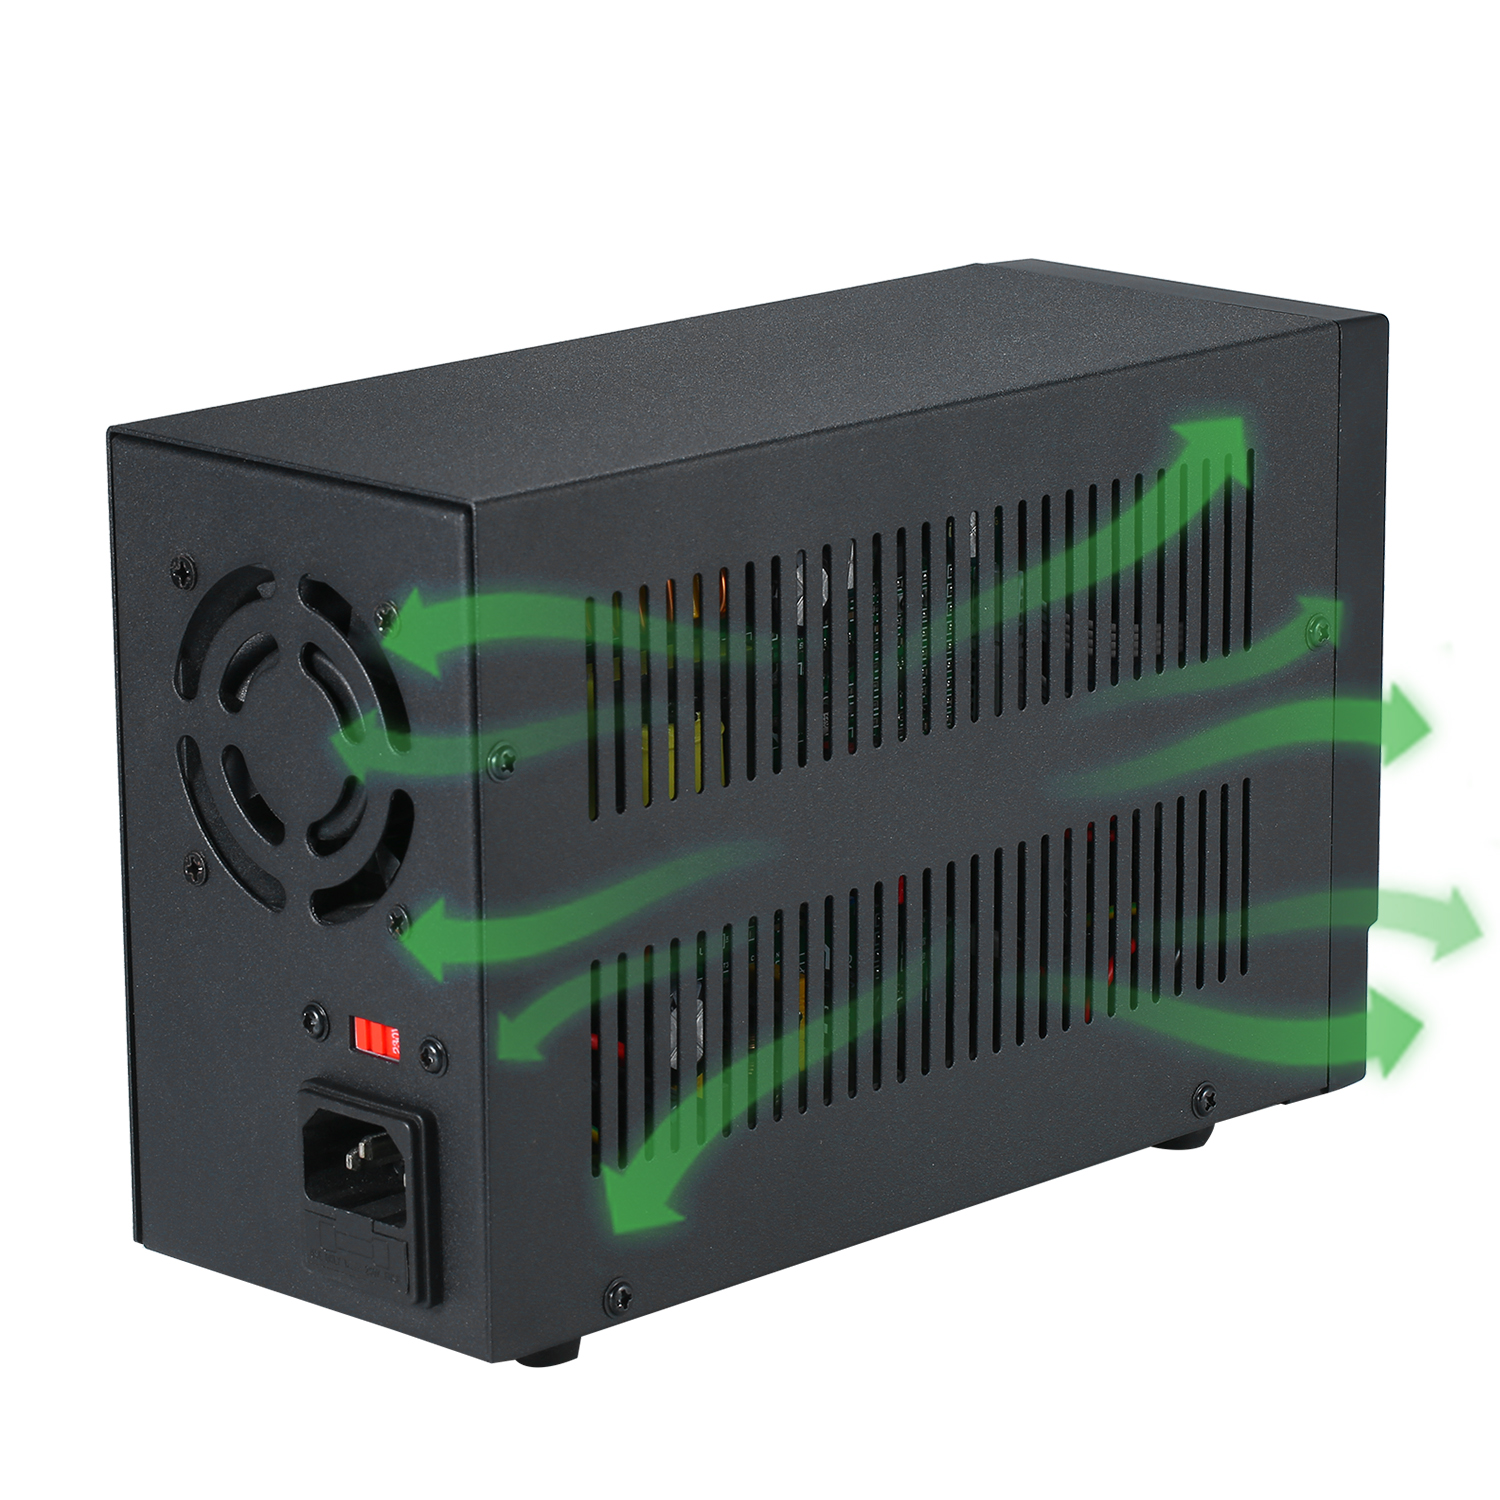 DPS3010U 0-30V 0-10A 300W Switching DC Power Supply 4 Digits Display LED High Precision Adjustable Mini Power Supply